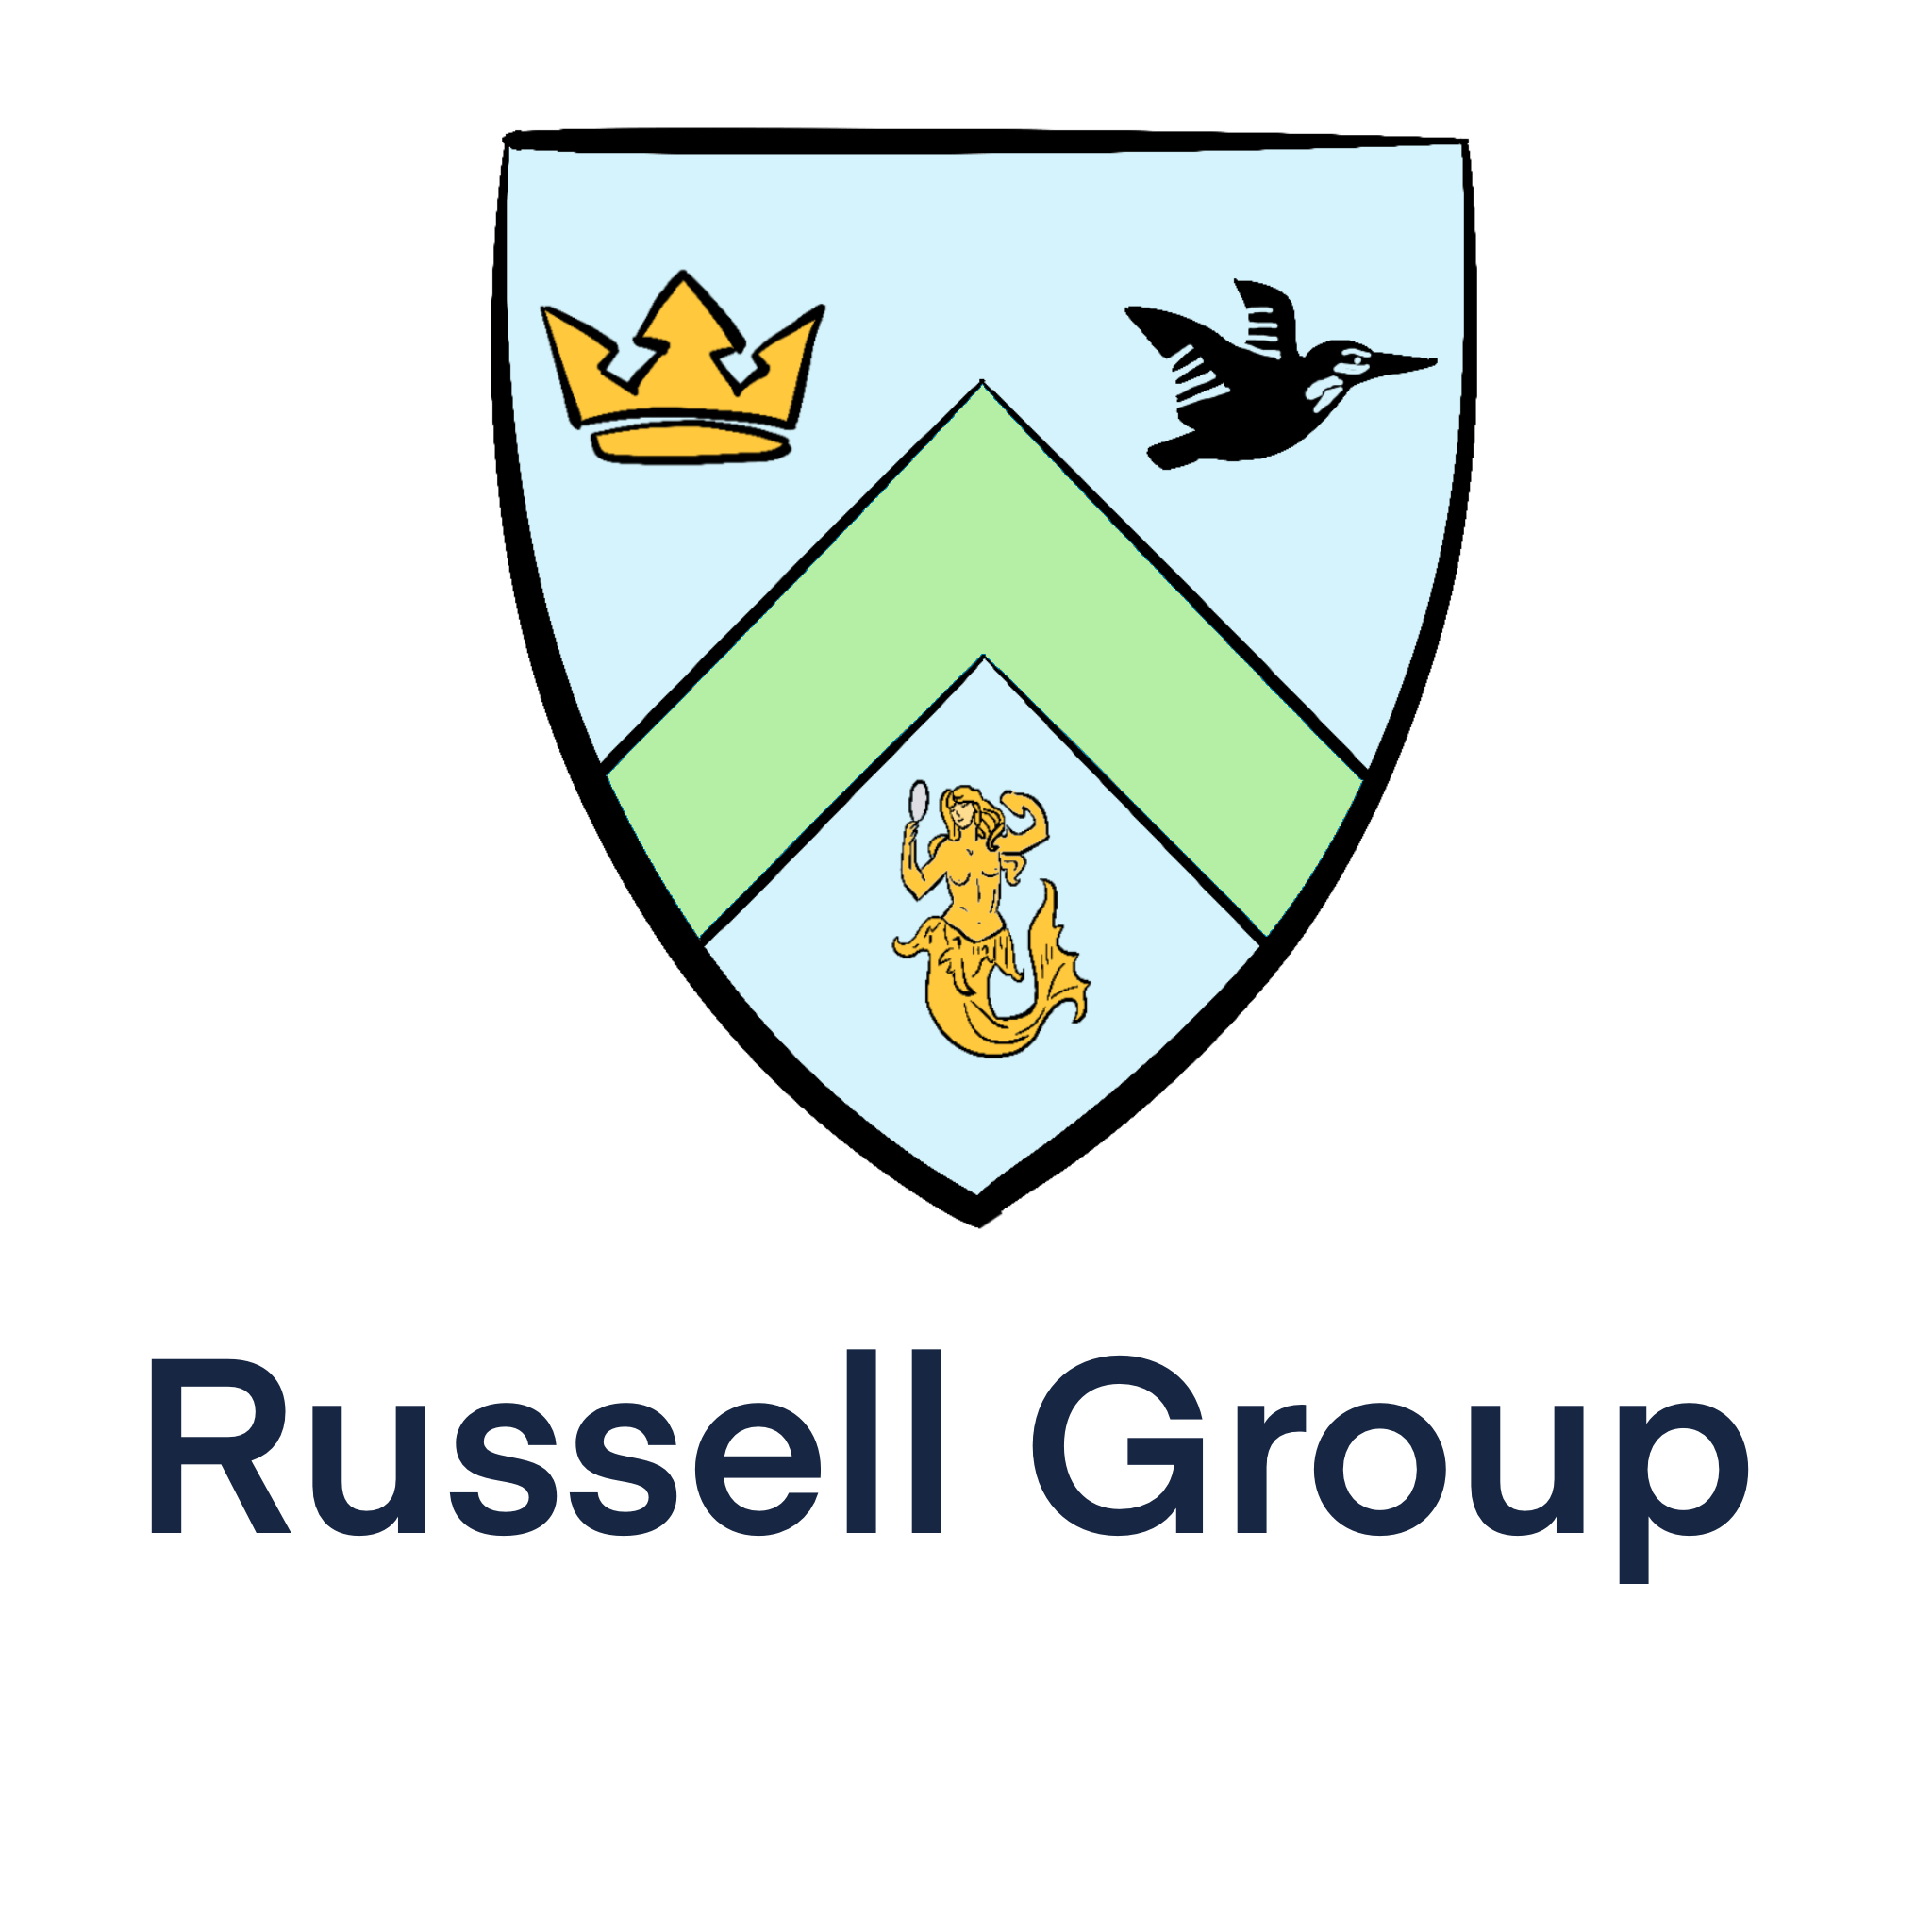 Finnian holds a degree from a Russell Group University